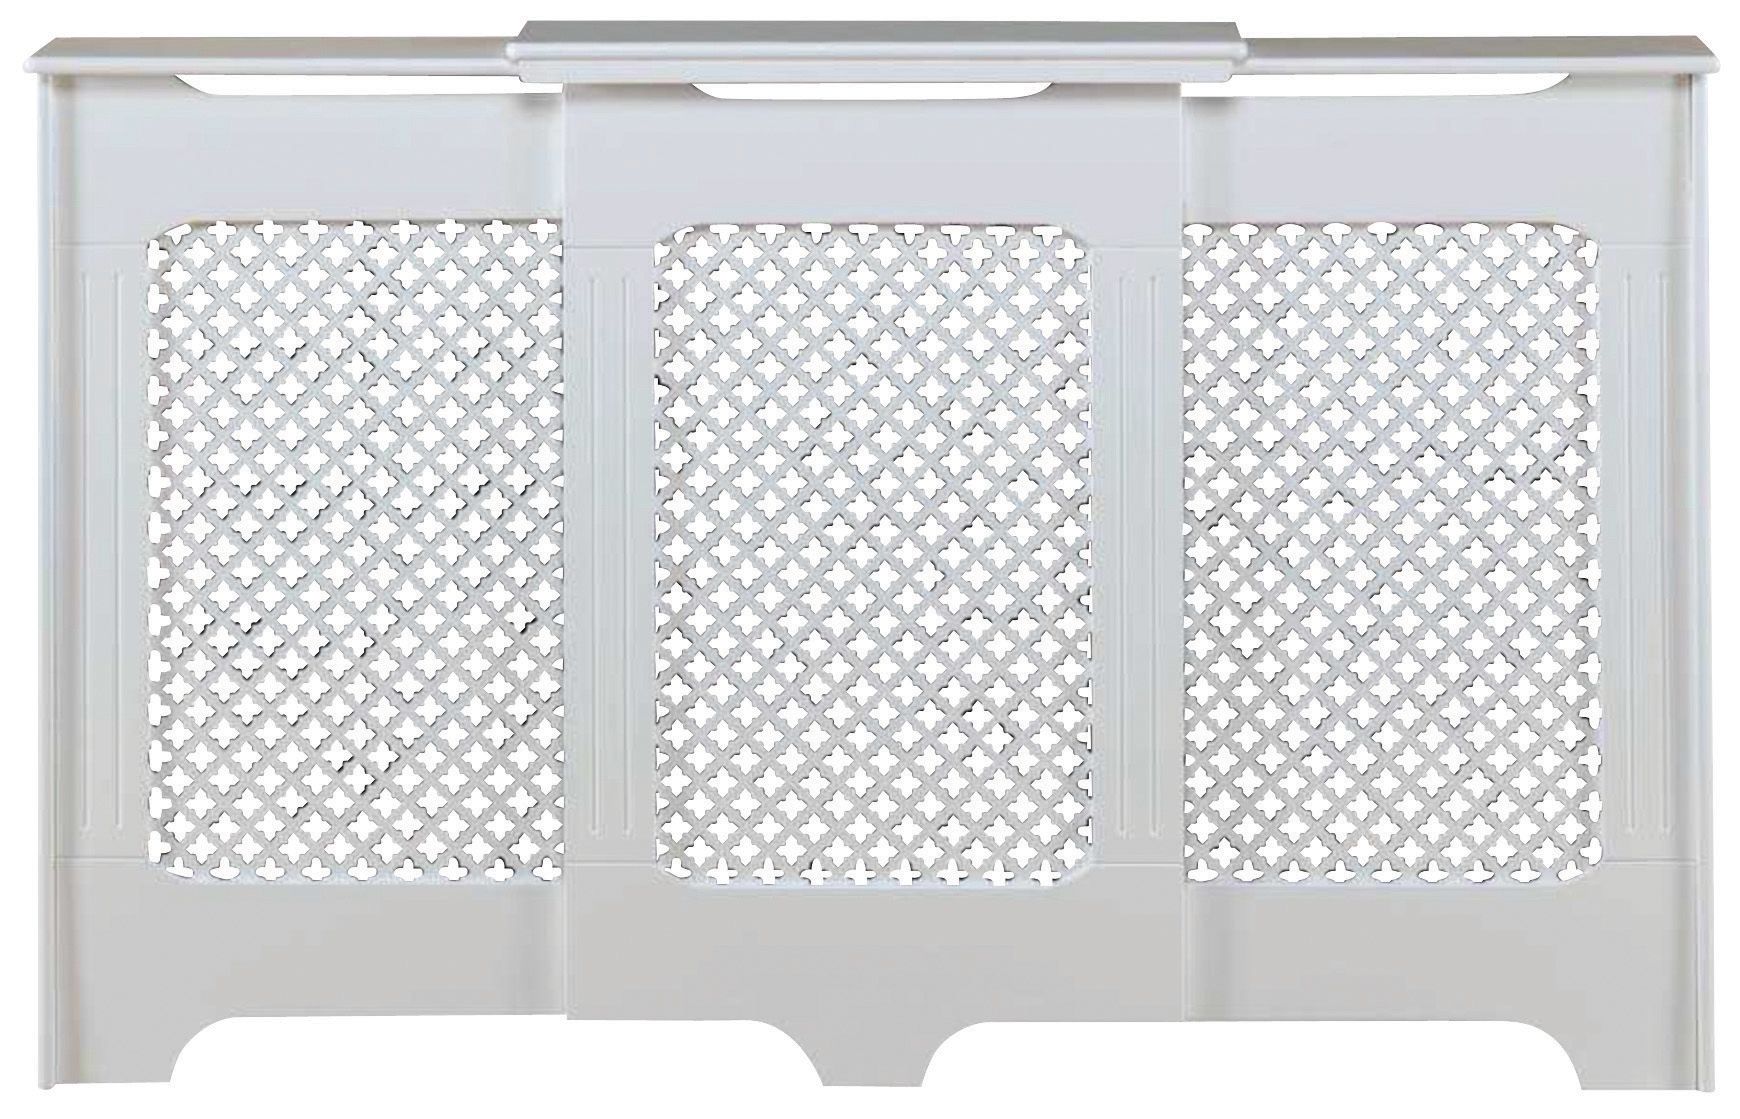 Image of Wickes Derwent Large Adjustable Radiator Cover White - 1430-2000 mm